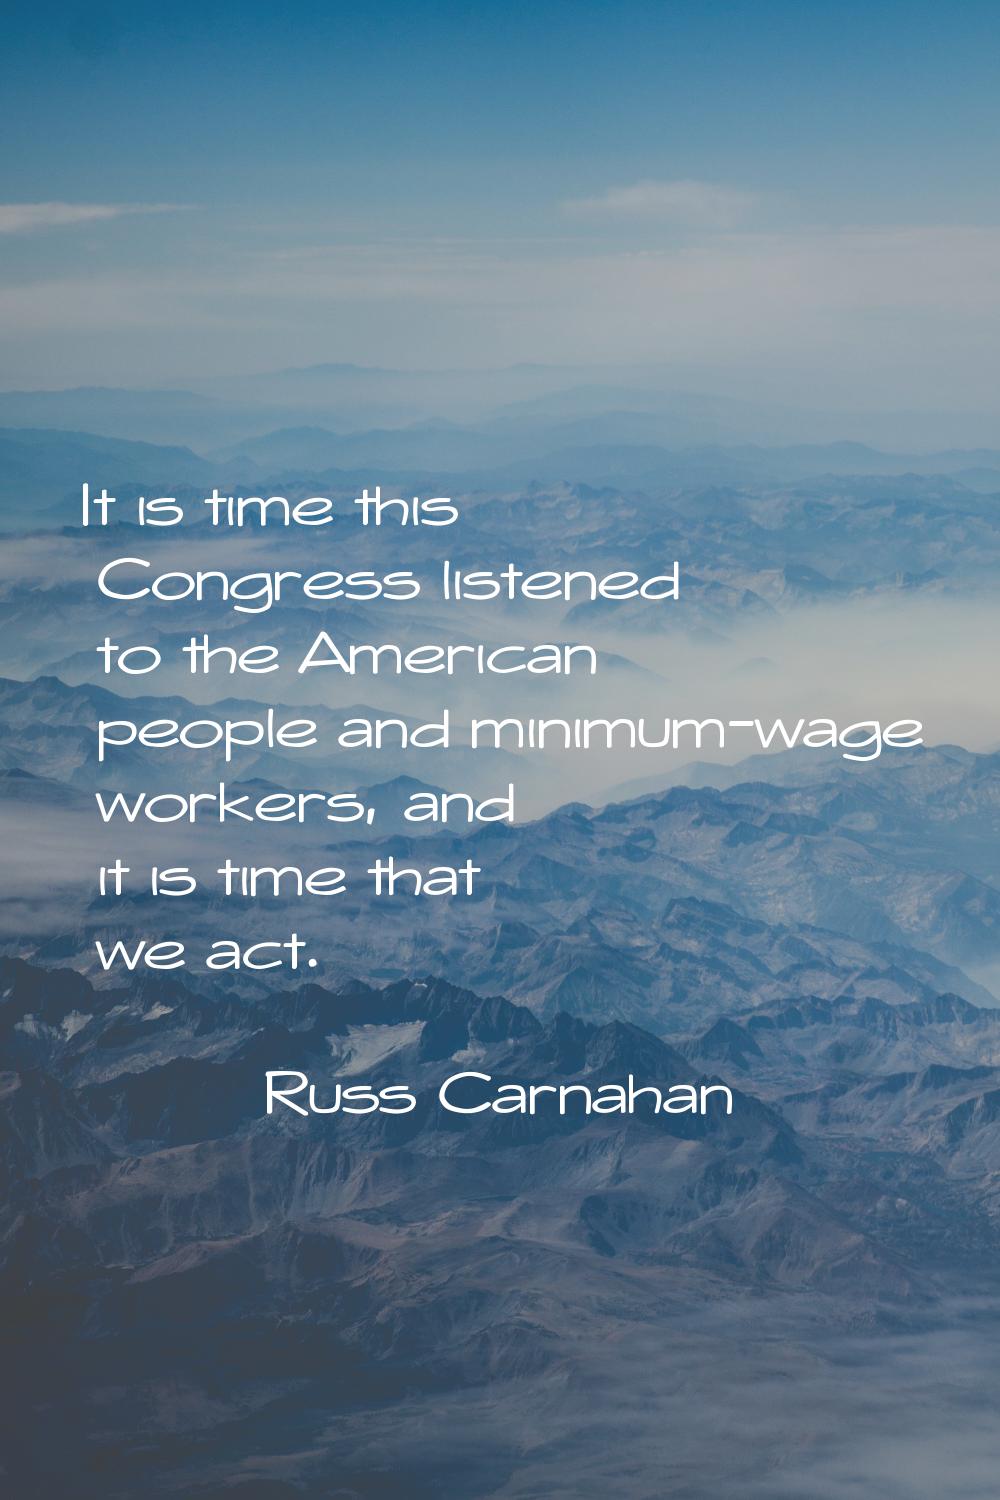 It is time this Congress listened to the American people and minimum-wage workers, and it is time t